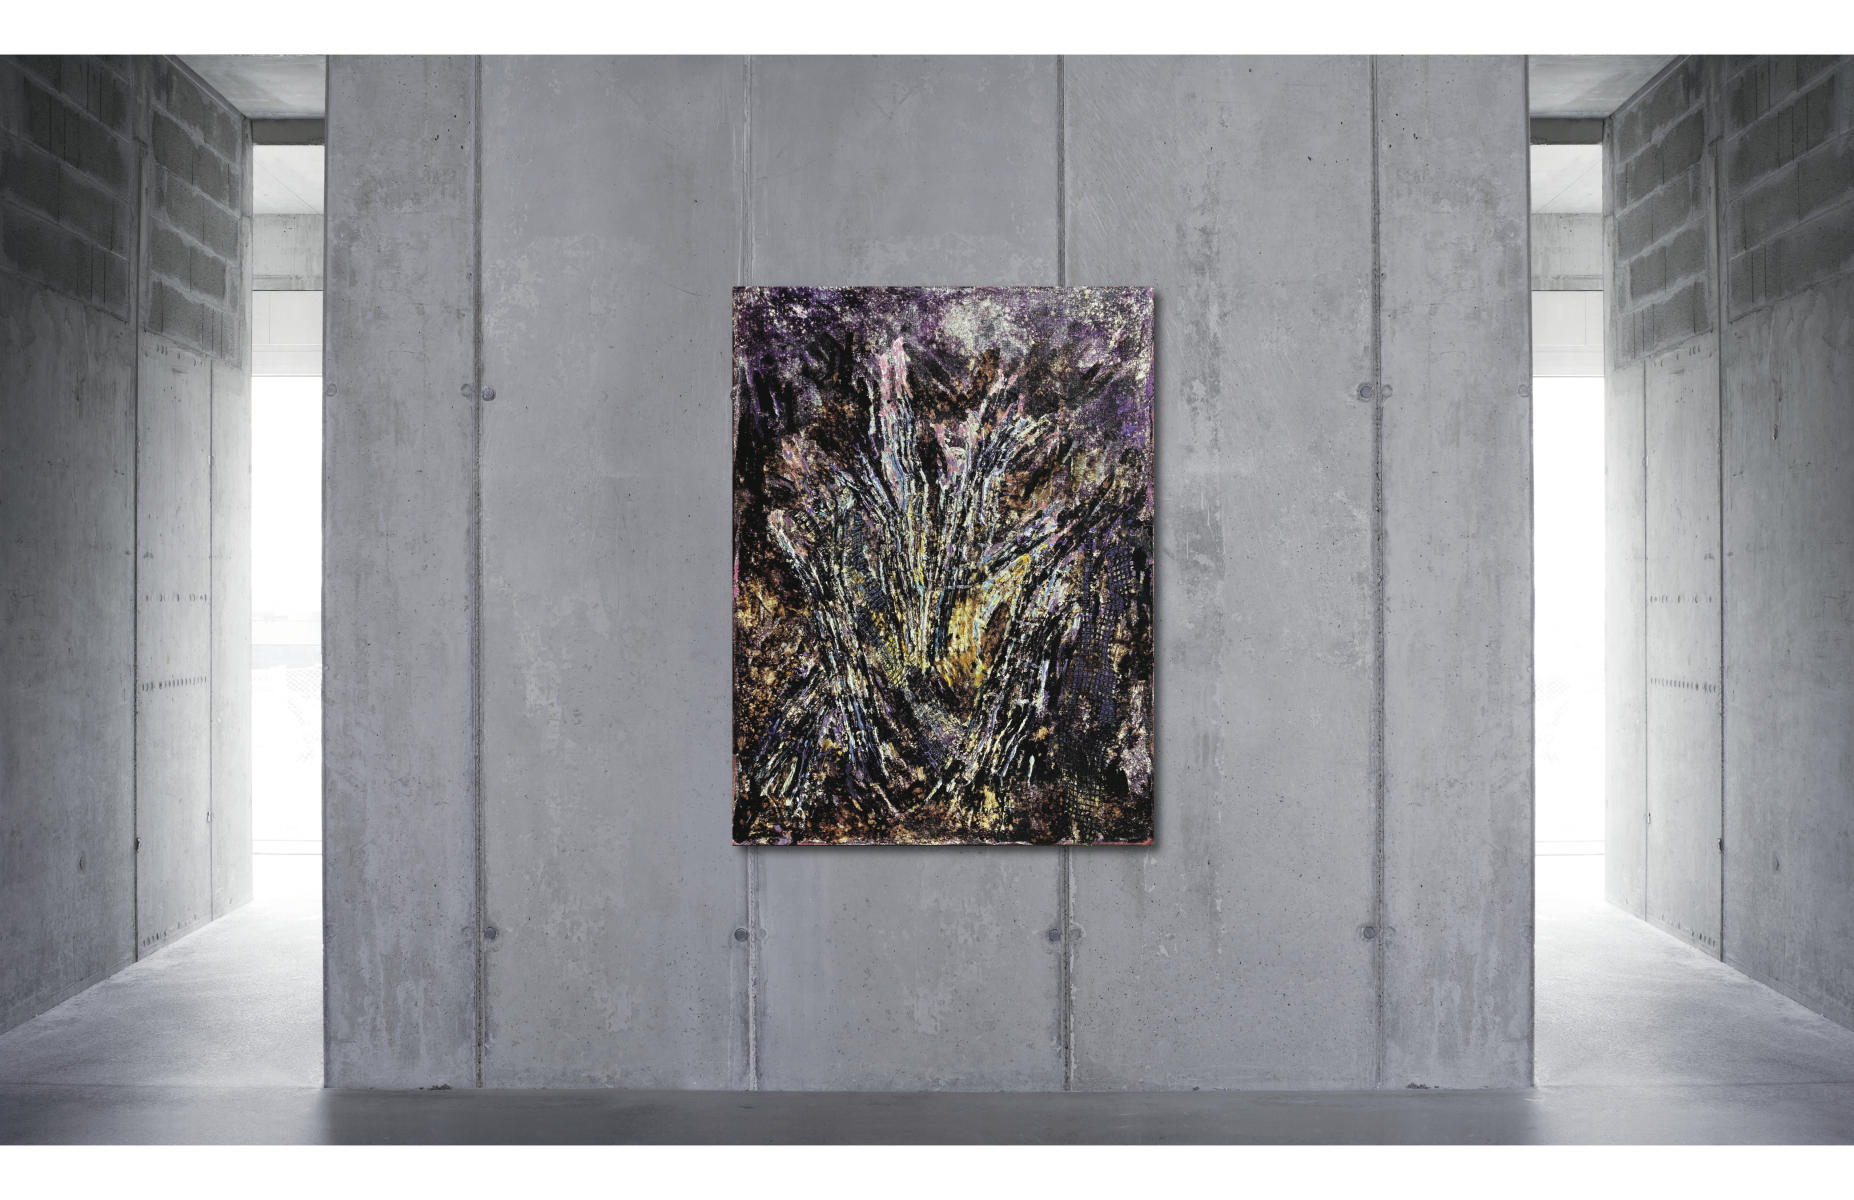 Shards | "Deep Purple Alert " | Approximate unframed scale view.